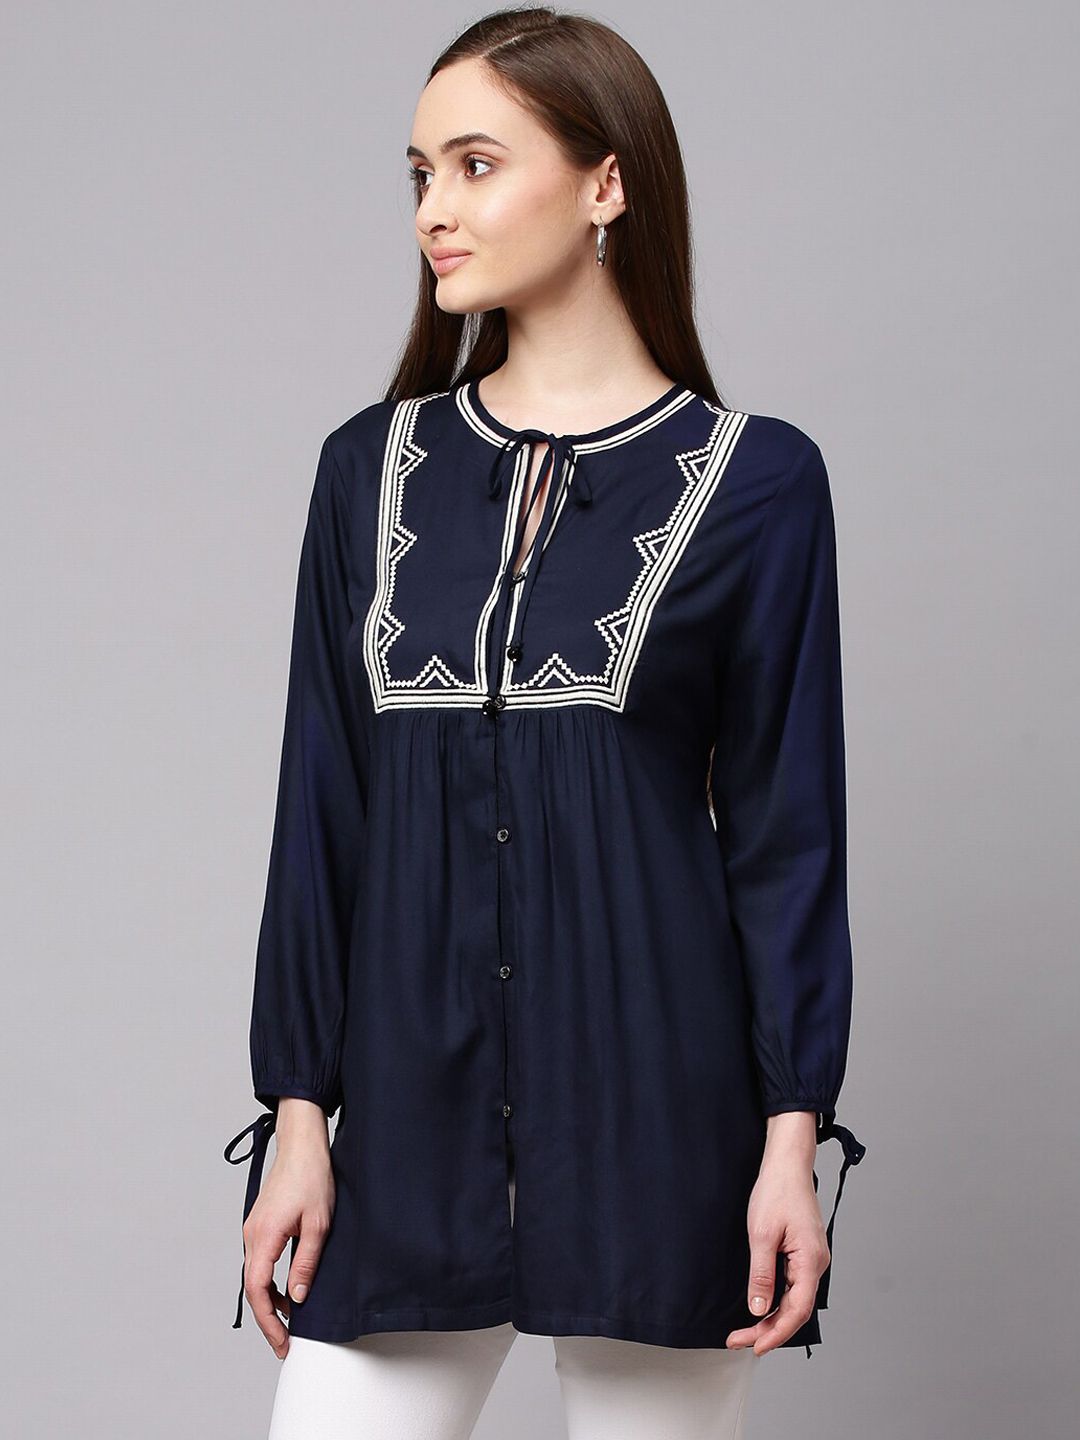 Modern Indian by CHEMISTRY Navy Blue & White Yoke Embroidered Pleated Straight Kurti Price in India